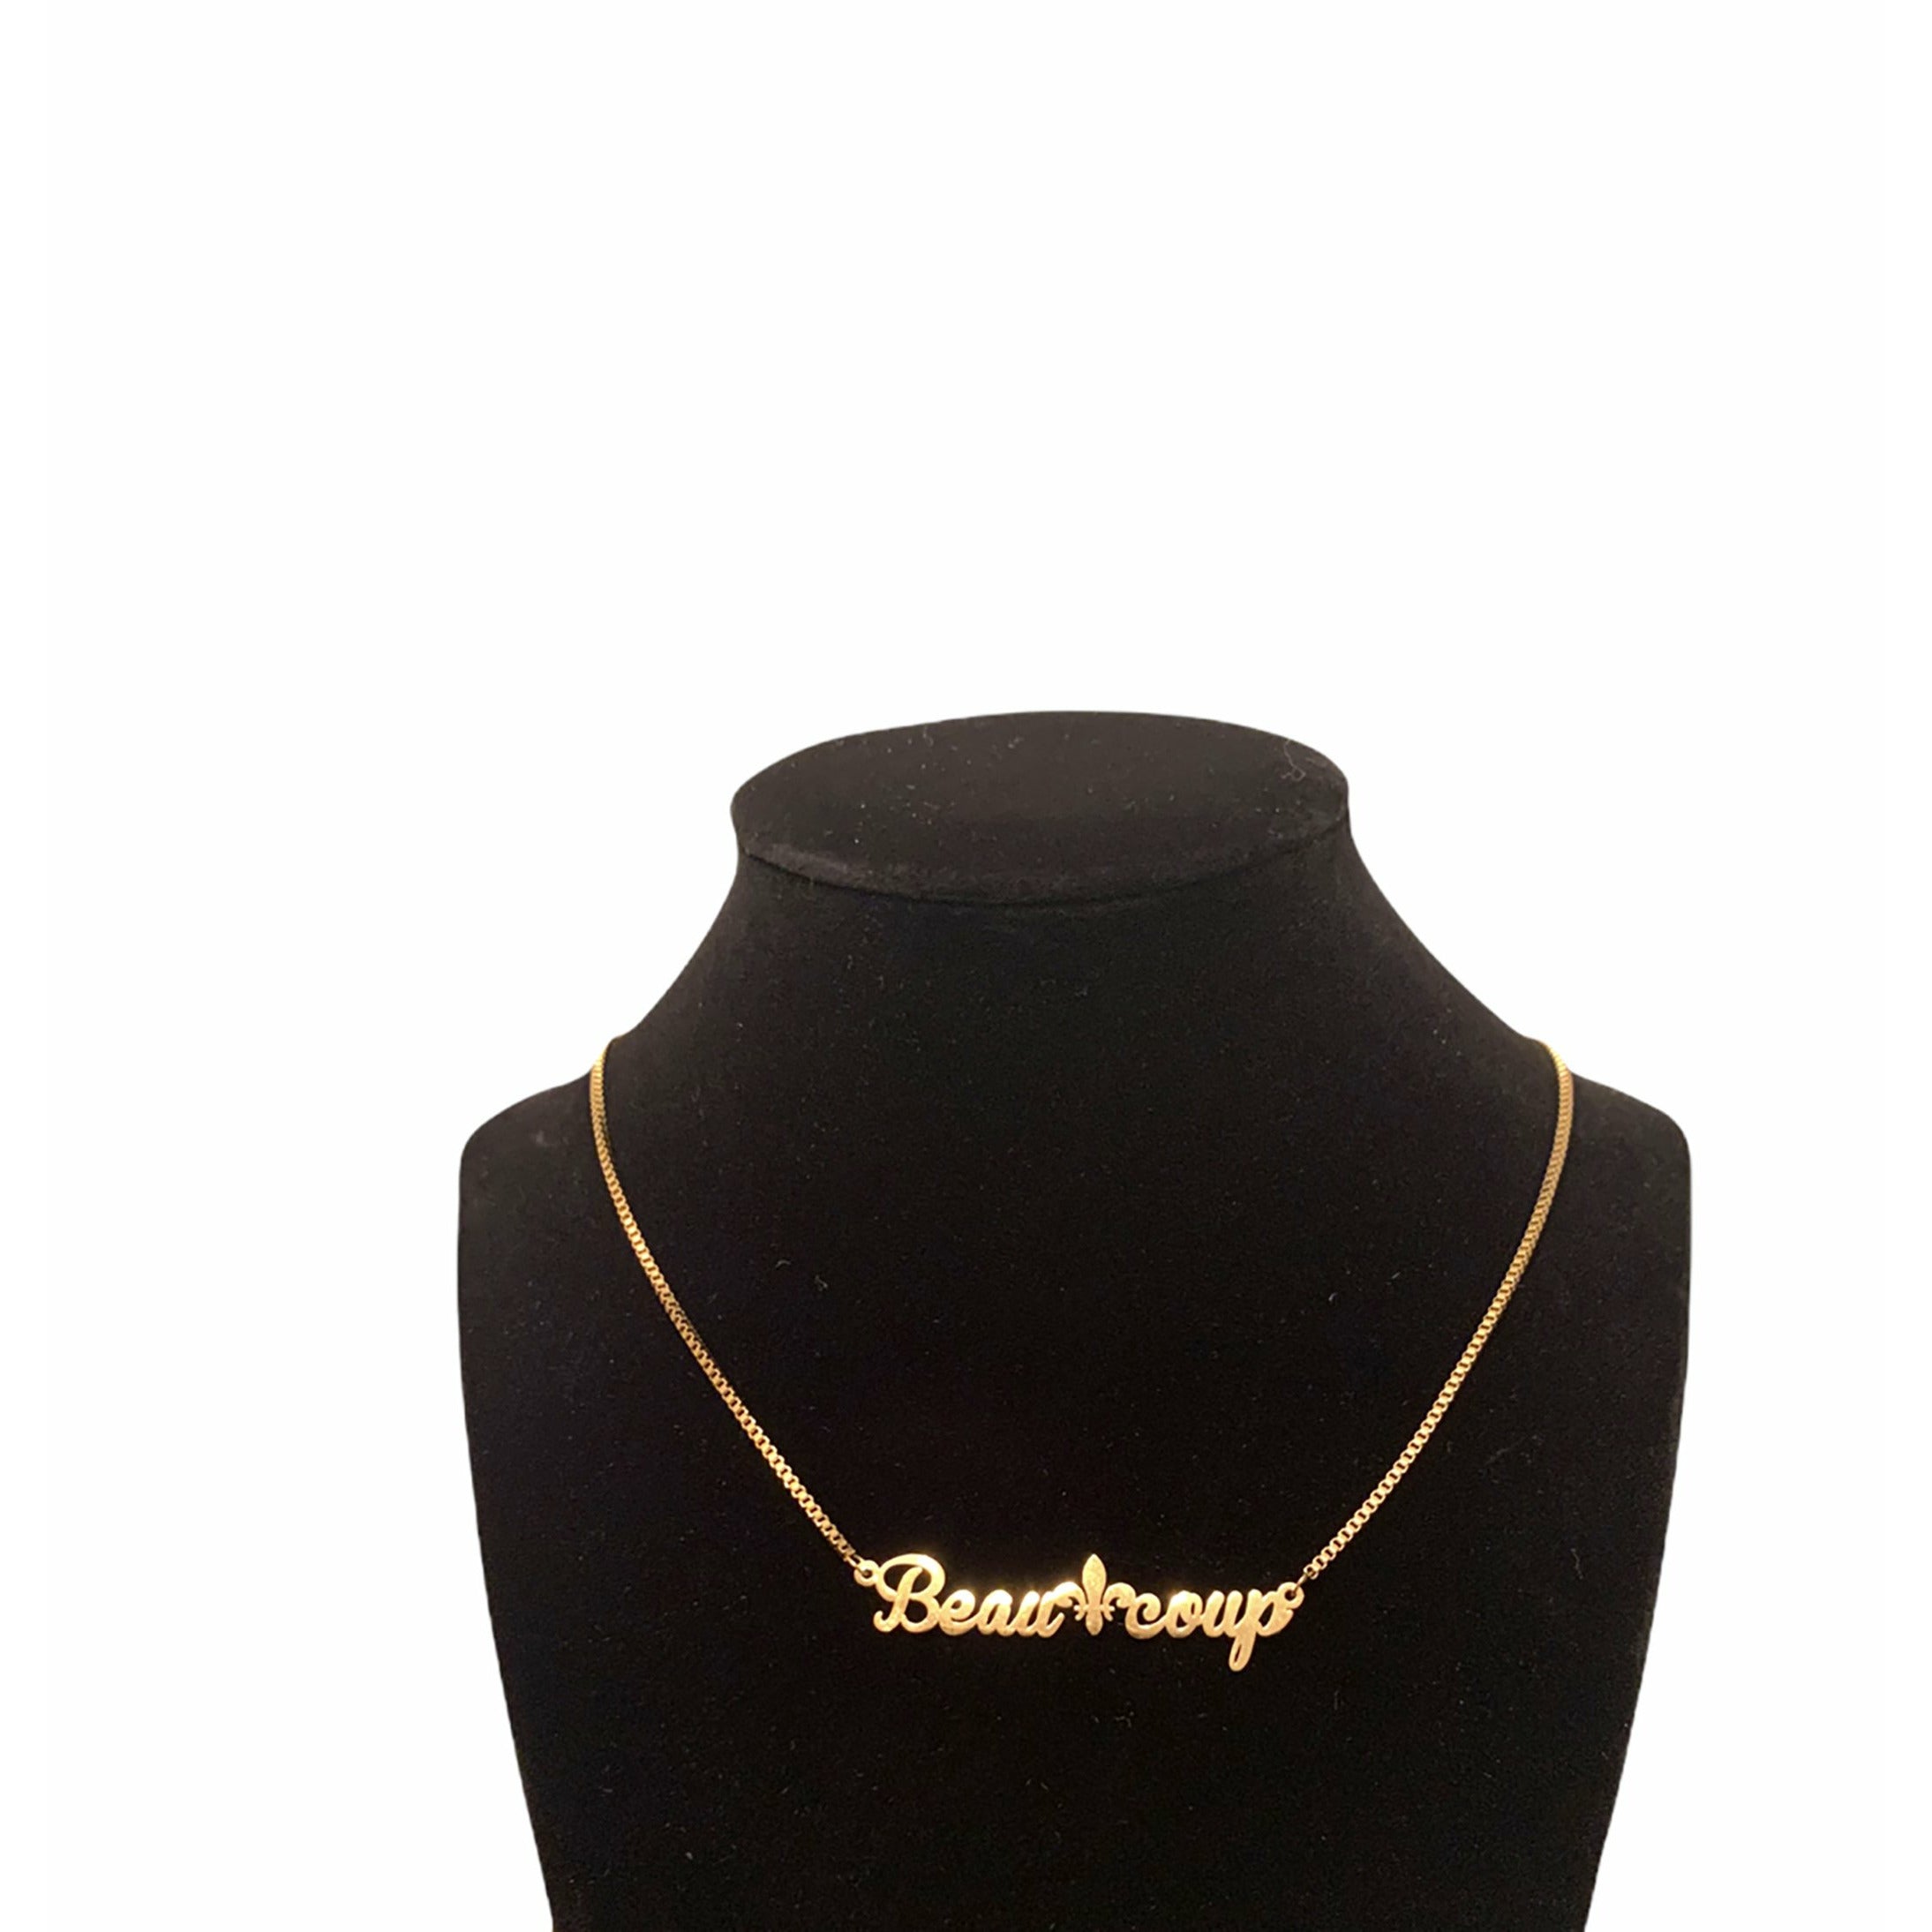 AS IS- Beaucoup Nameplate Necklace